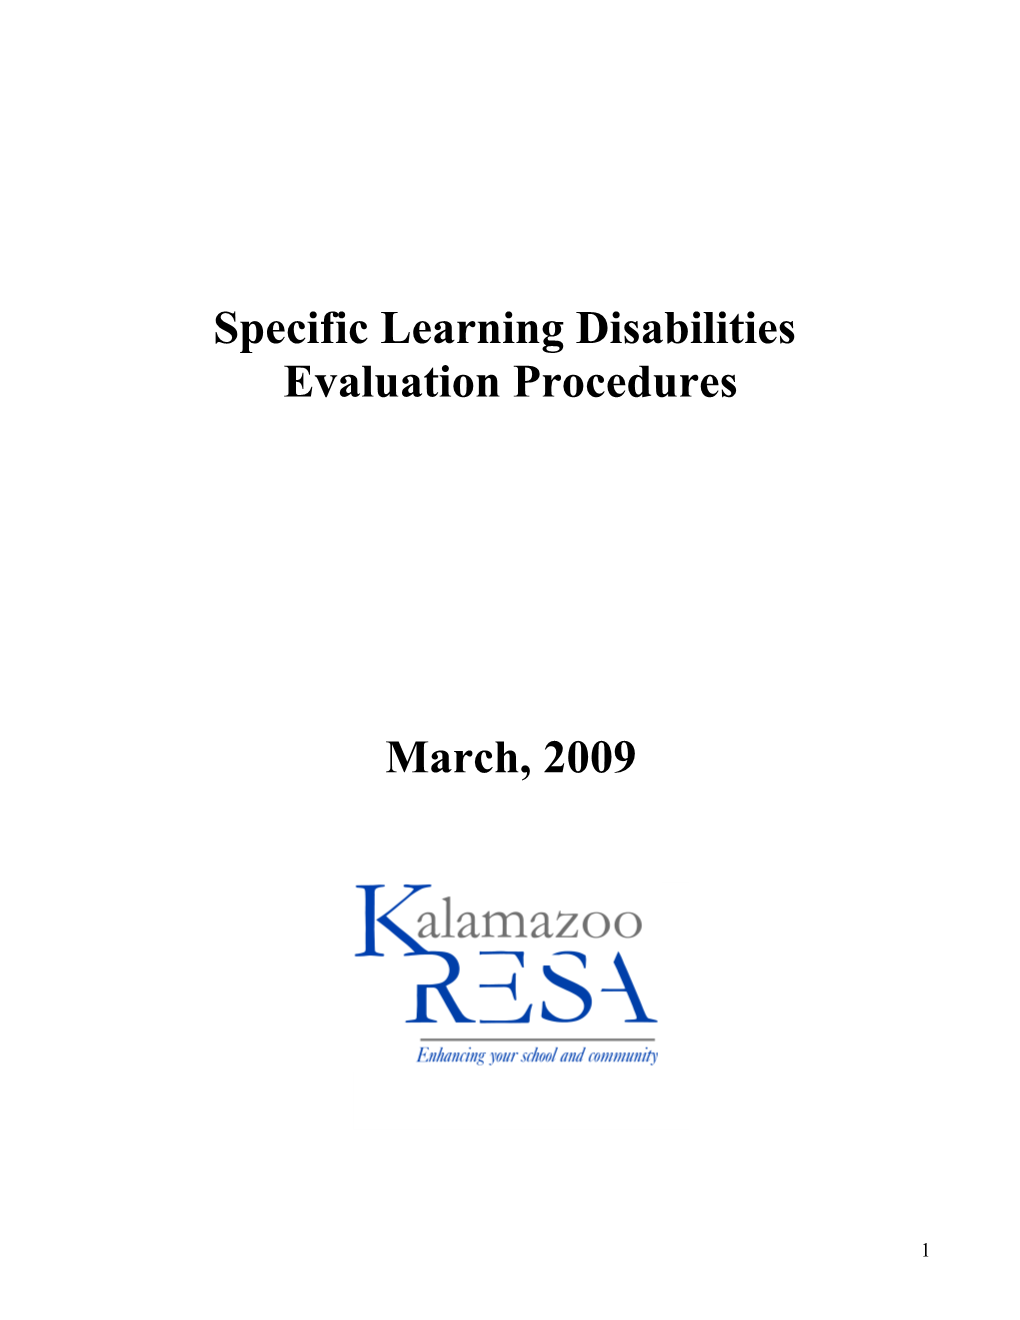 Specific Learning Disabilities Evaluation Procedures